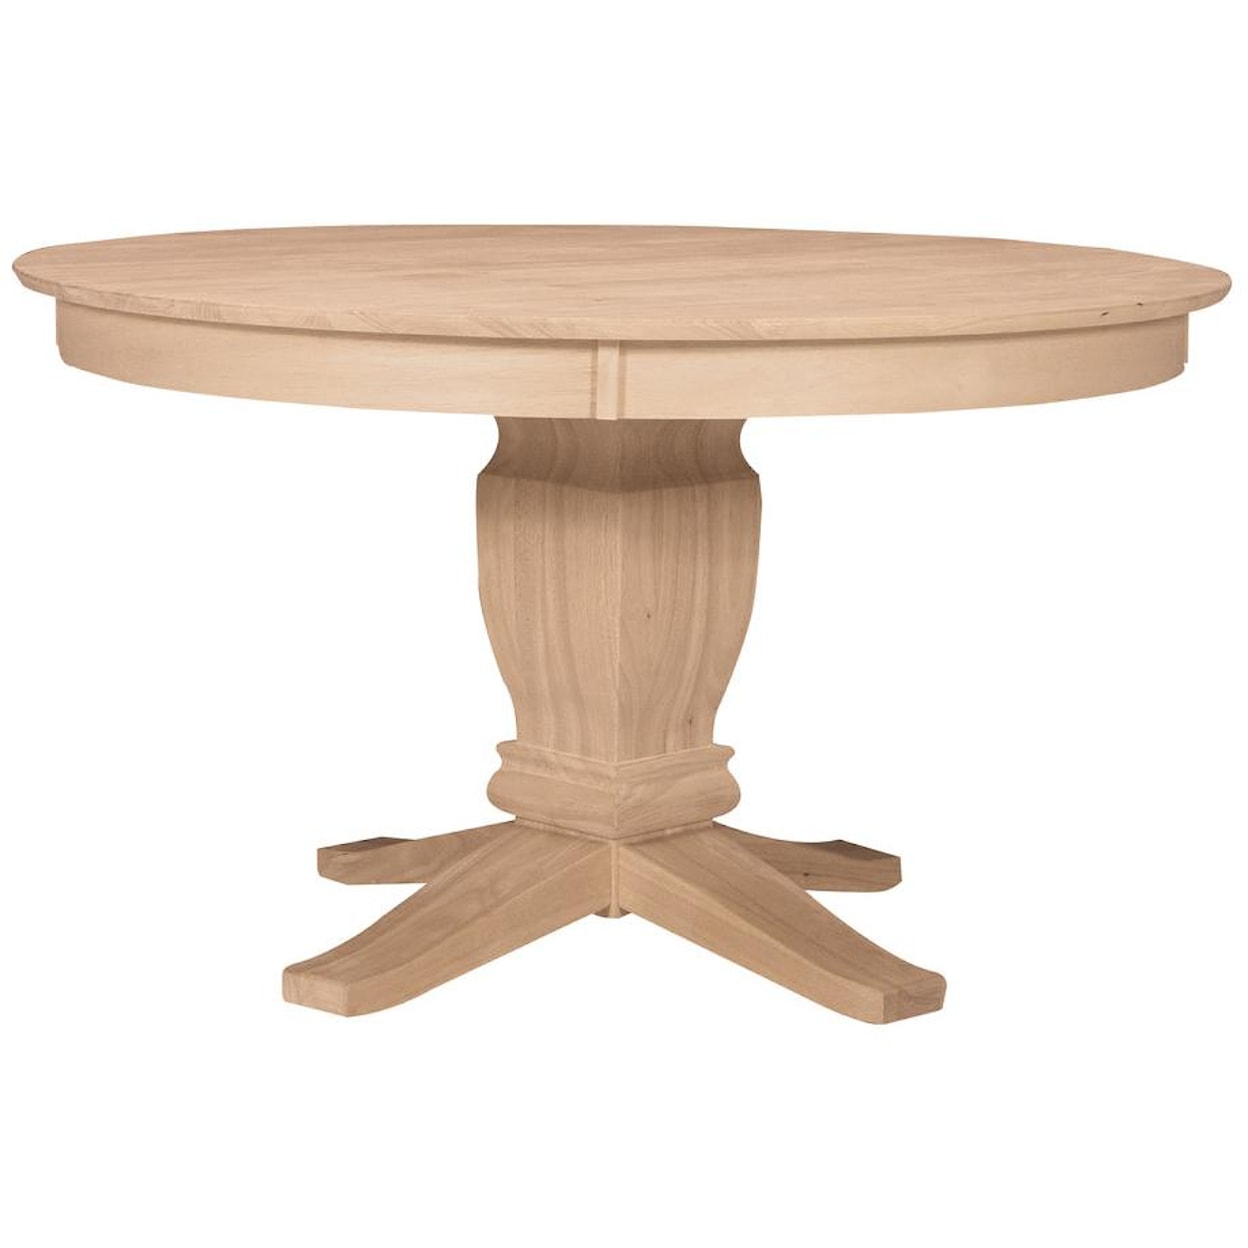 John Thomas SELECT Dining Room 52" Round Solid Top Pedestal Table